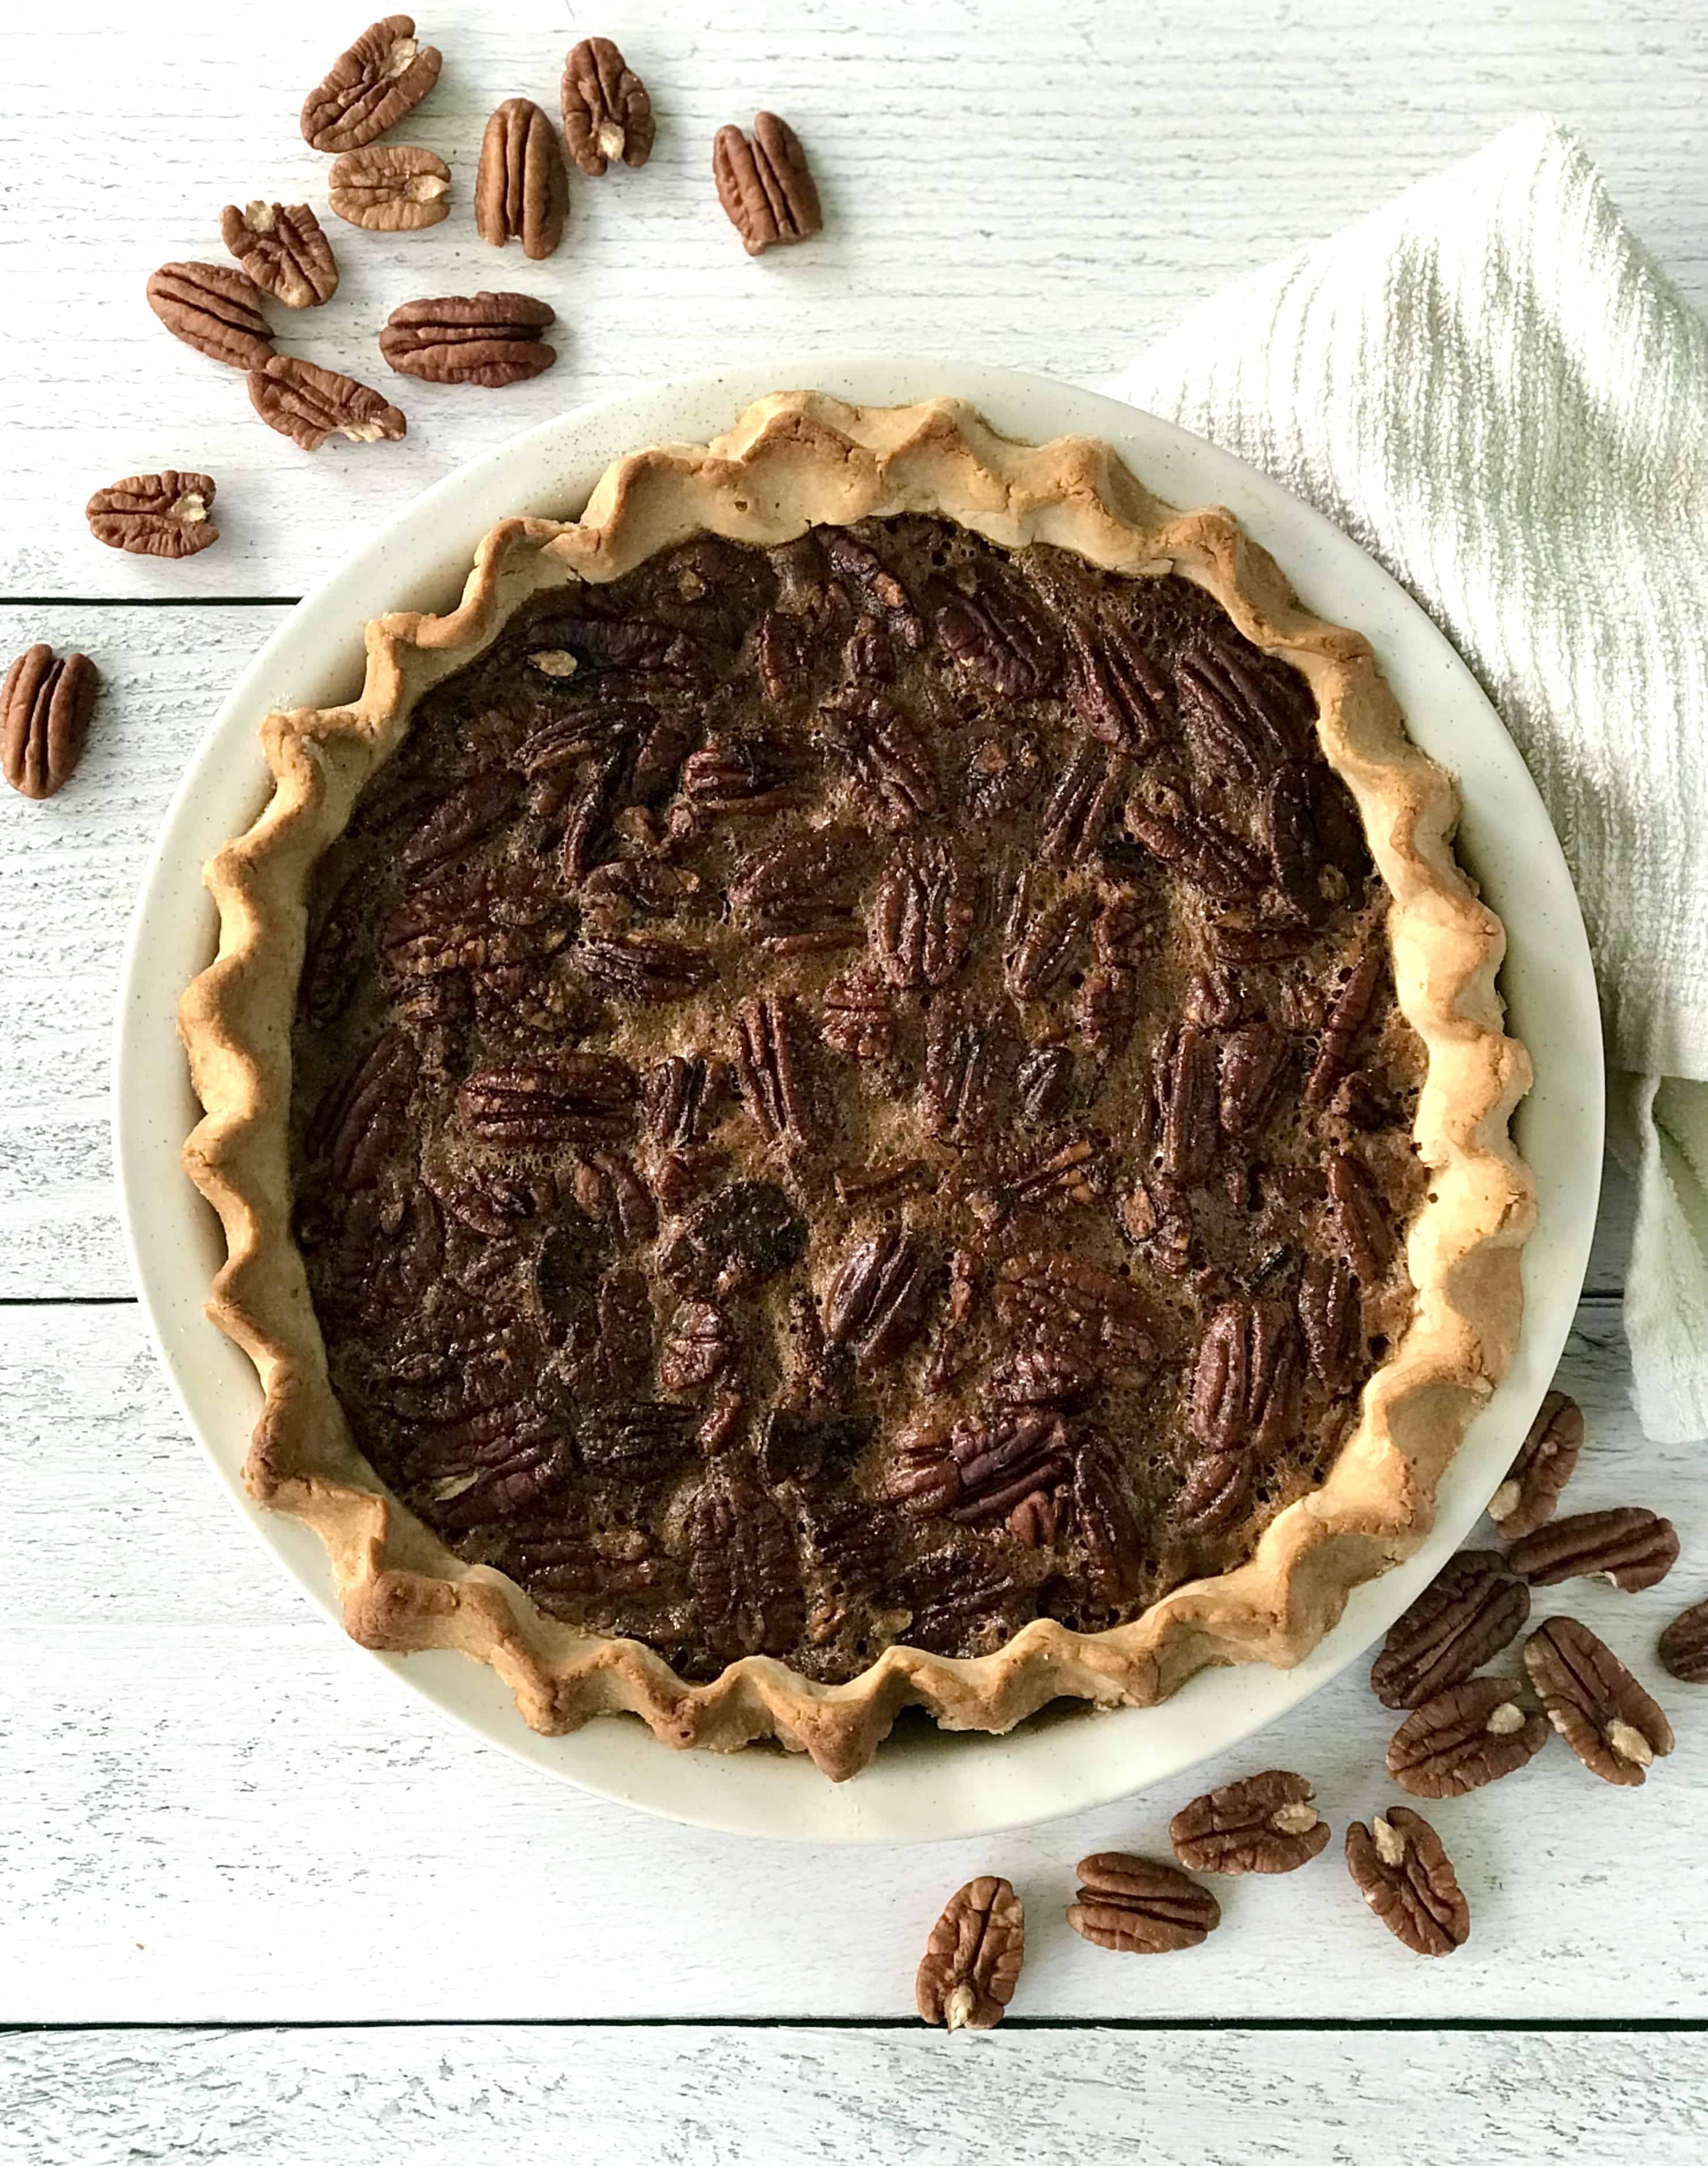 Dairy-free pecan pie filling in a grain-free crust in a pie dish on a white wooden table strewn with pecans.